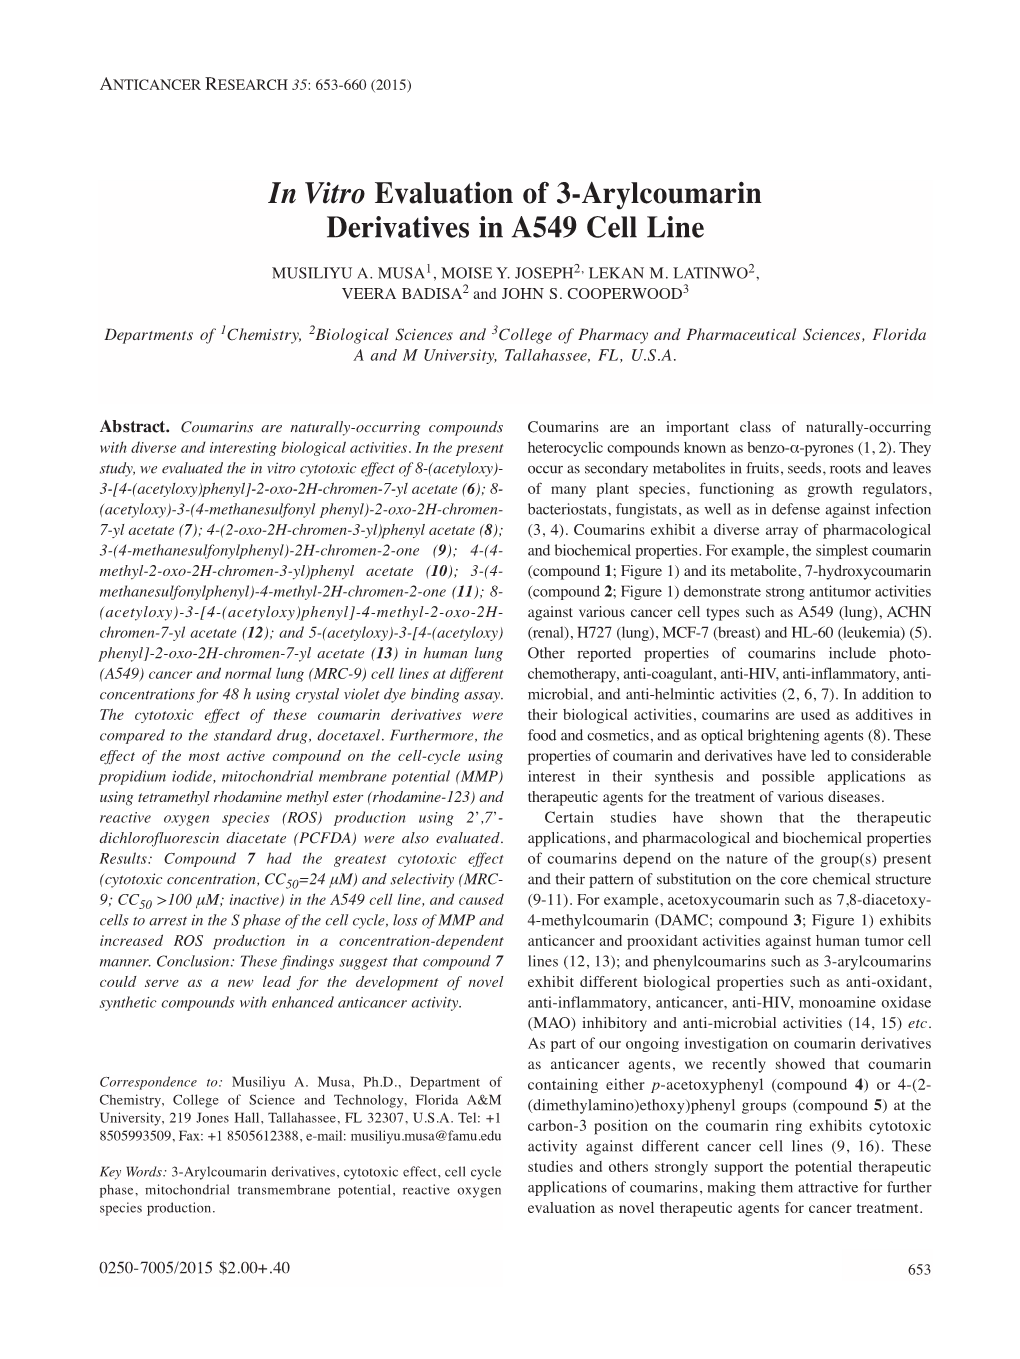 In Vitro Evaluation of 3-Arylcoumarin Derivatives in A549 Cell Line